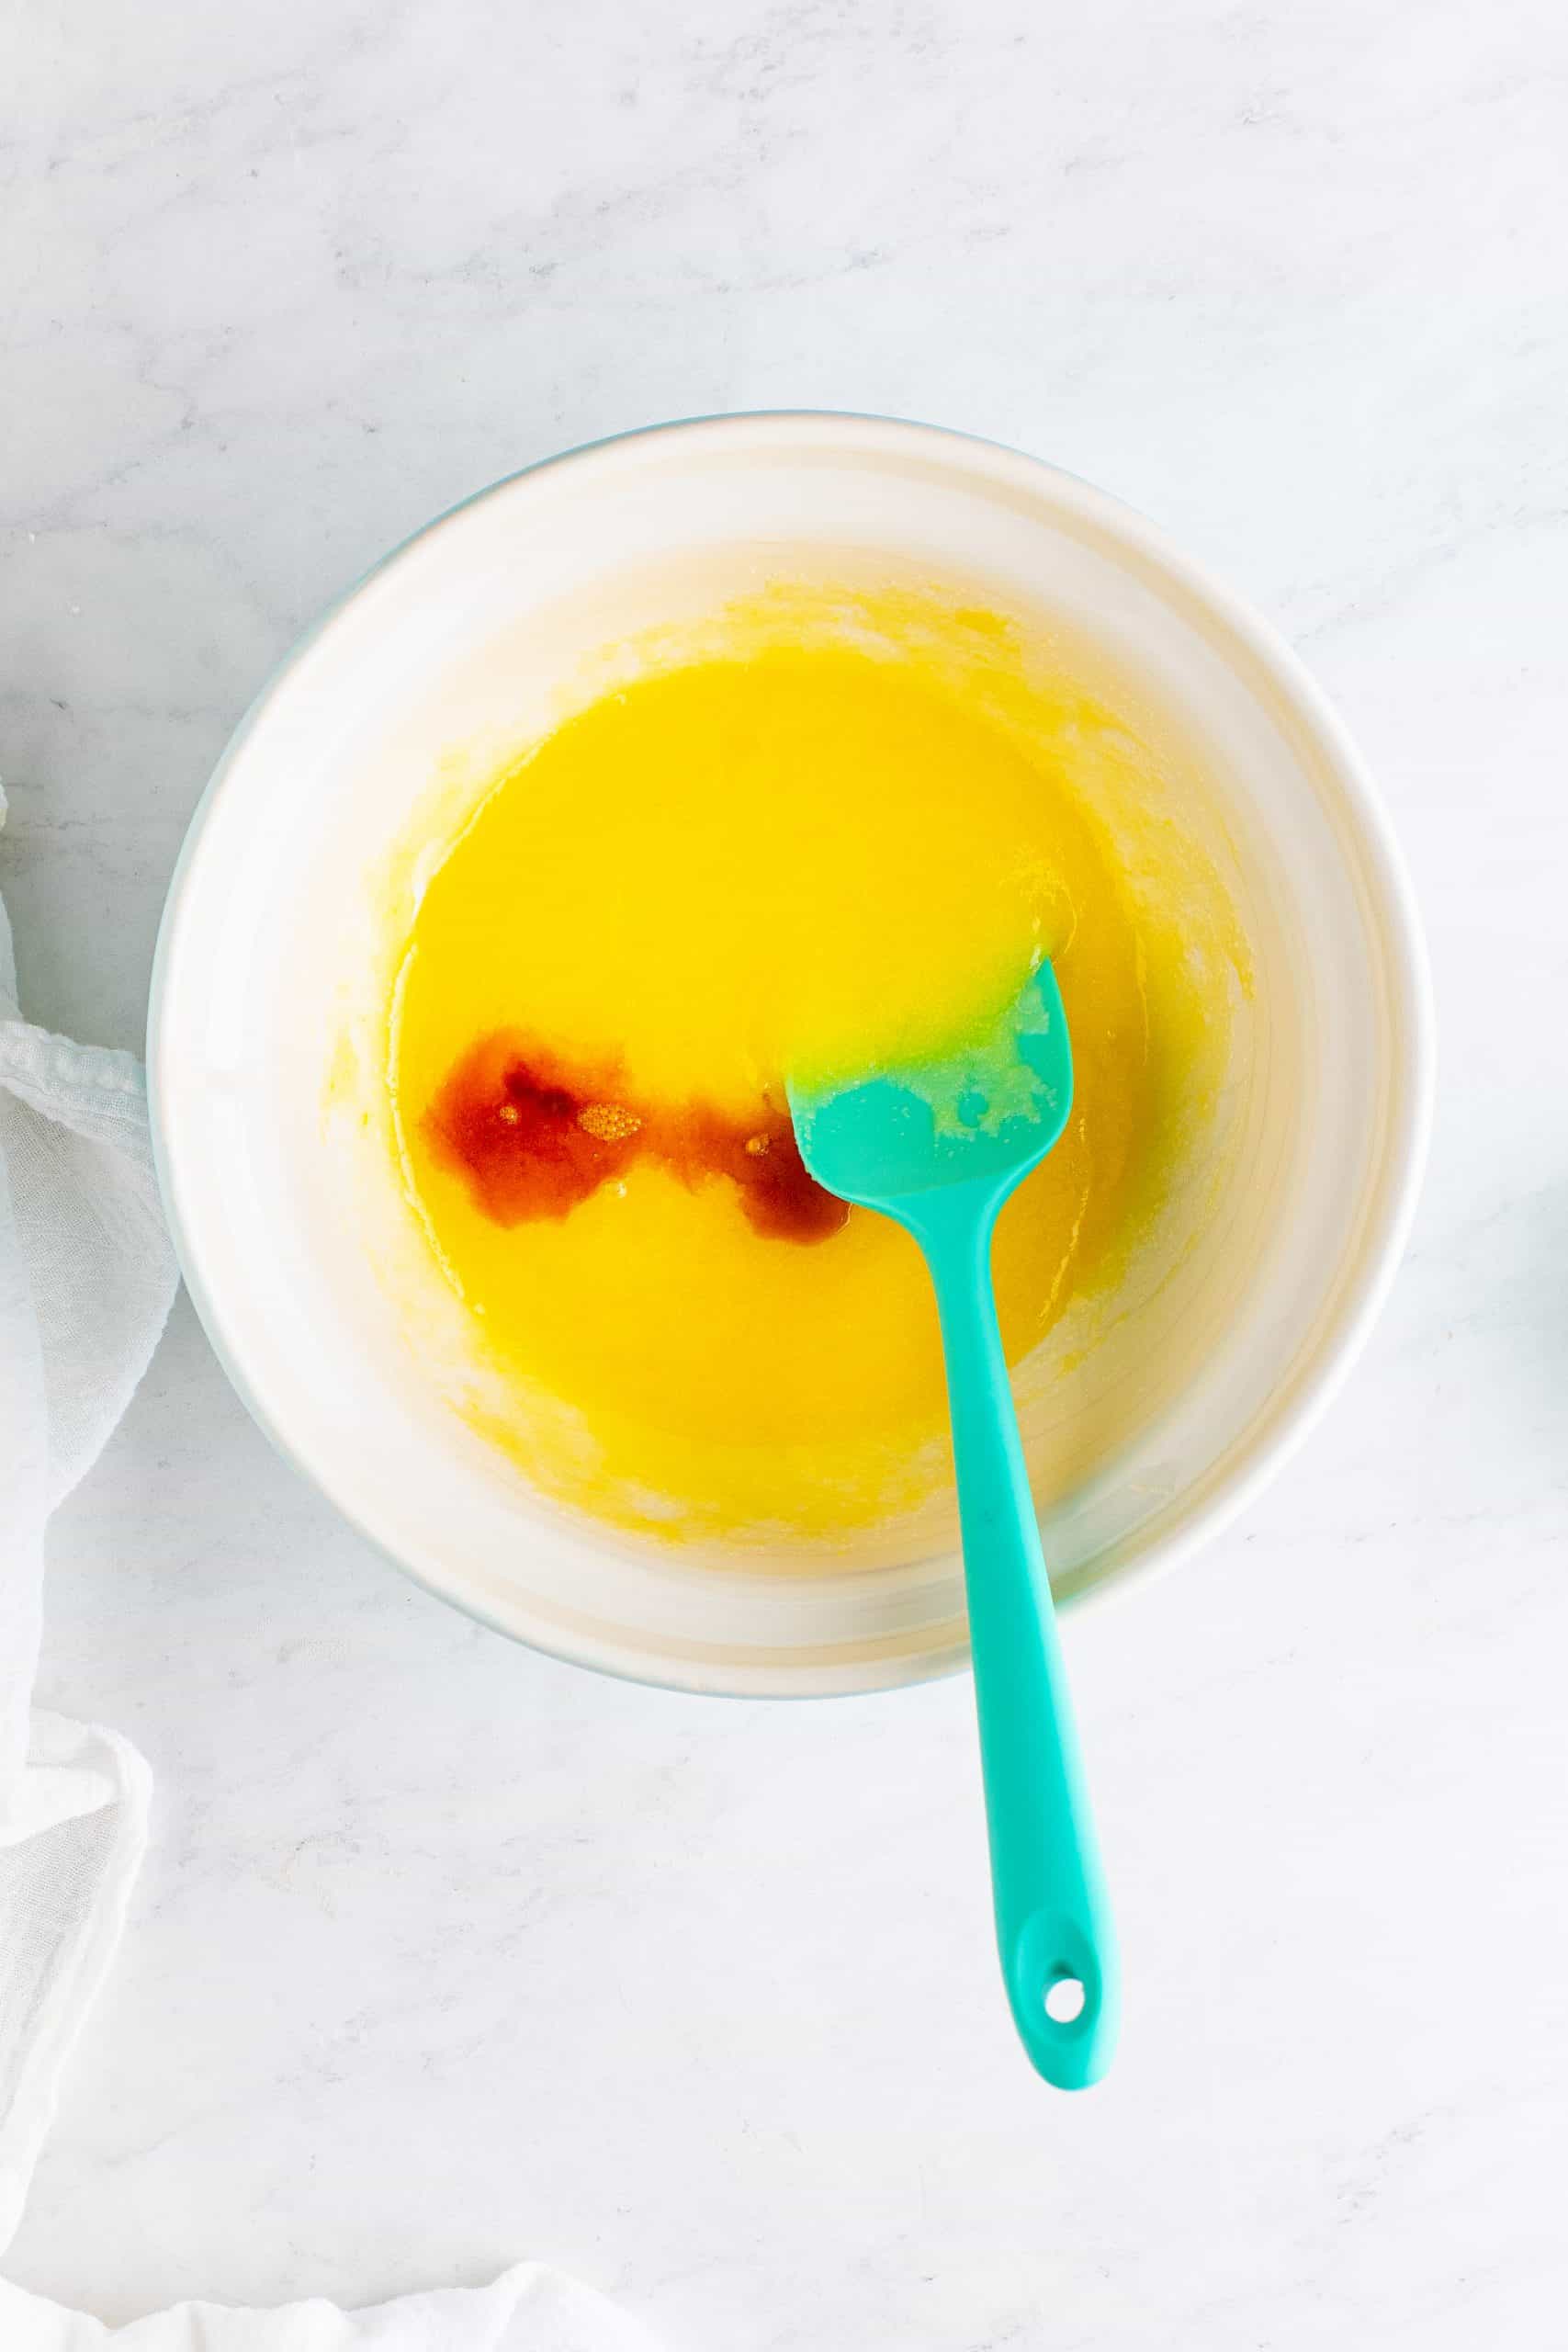 vanilla extract added to melted butter and sugar mixture in a white bowl.